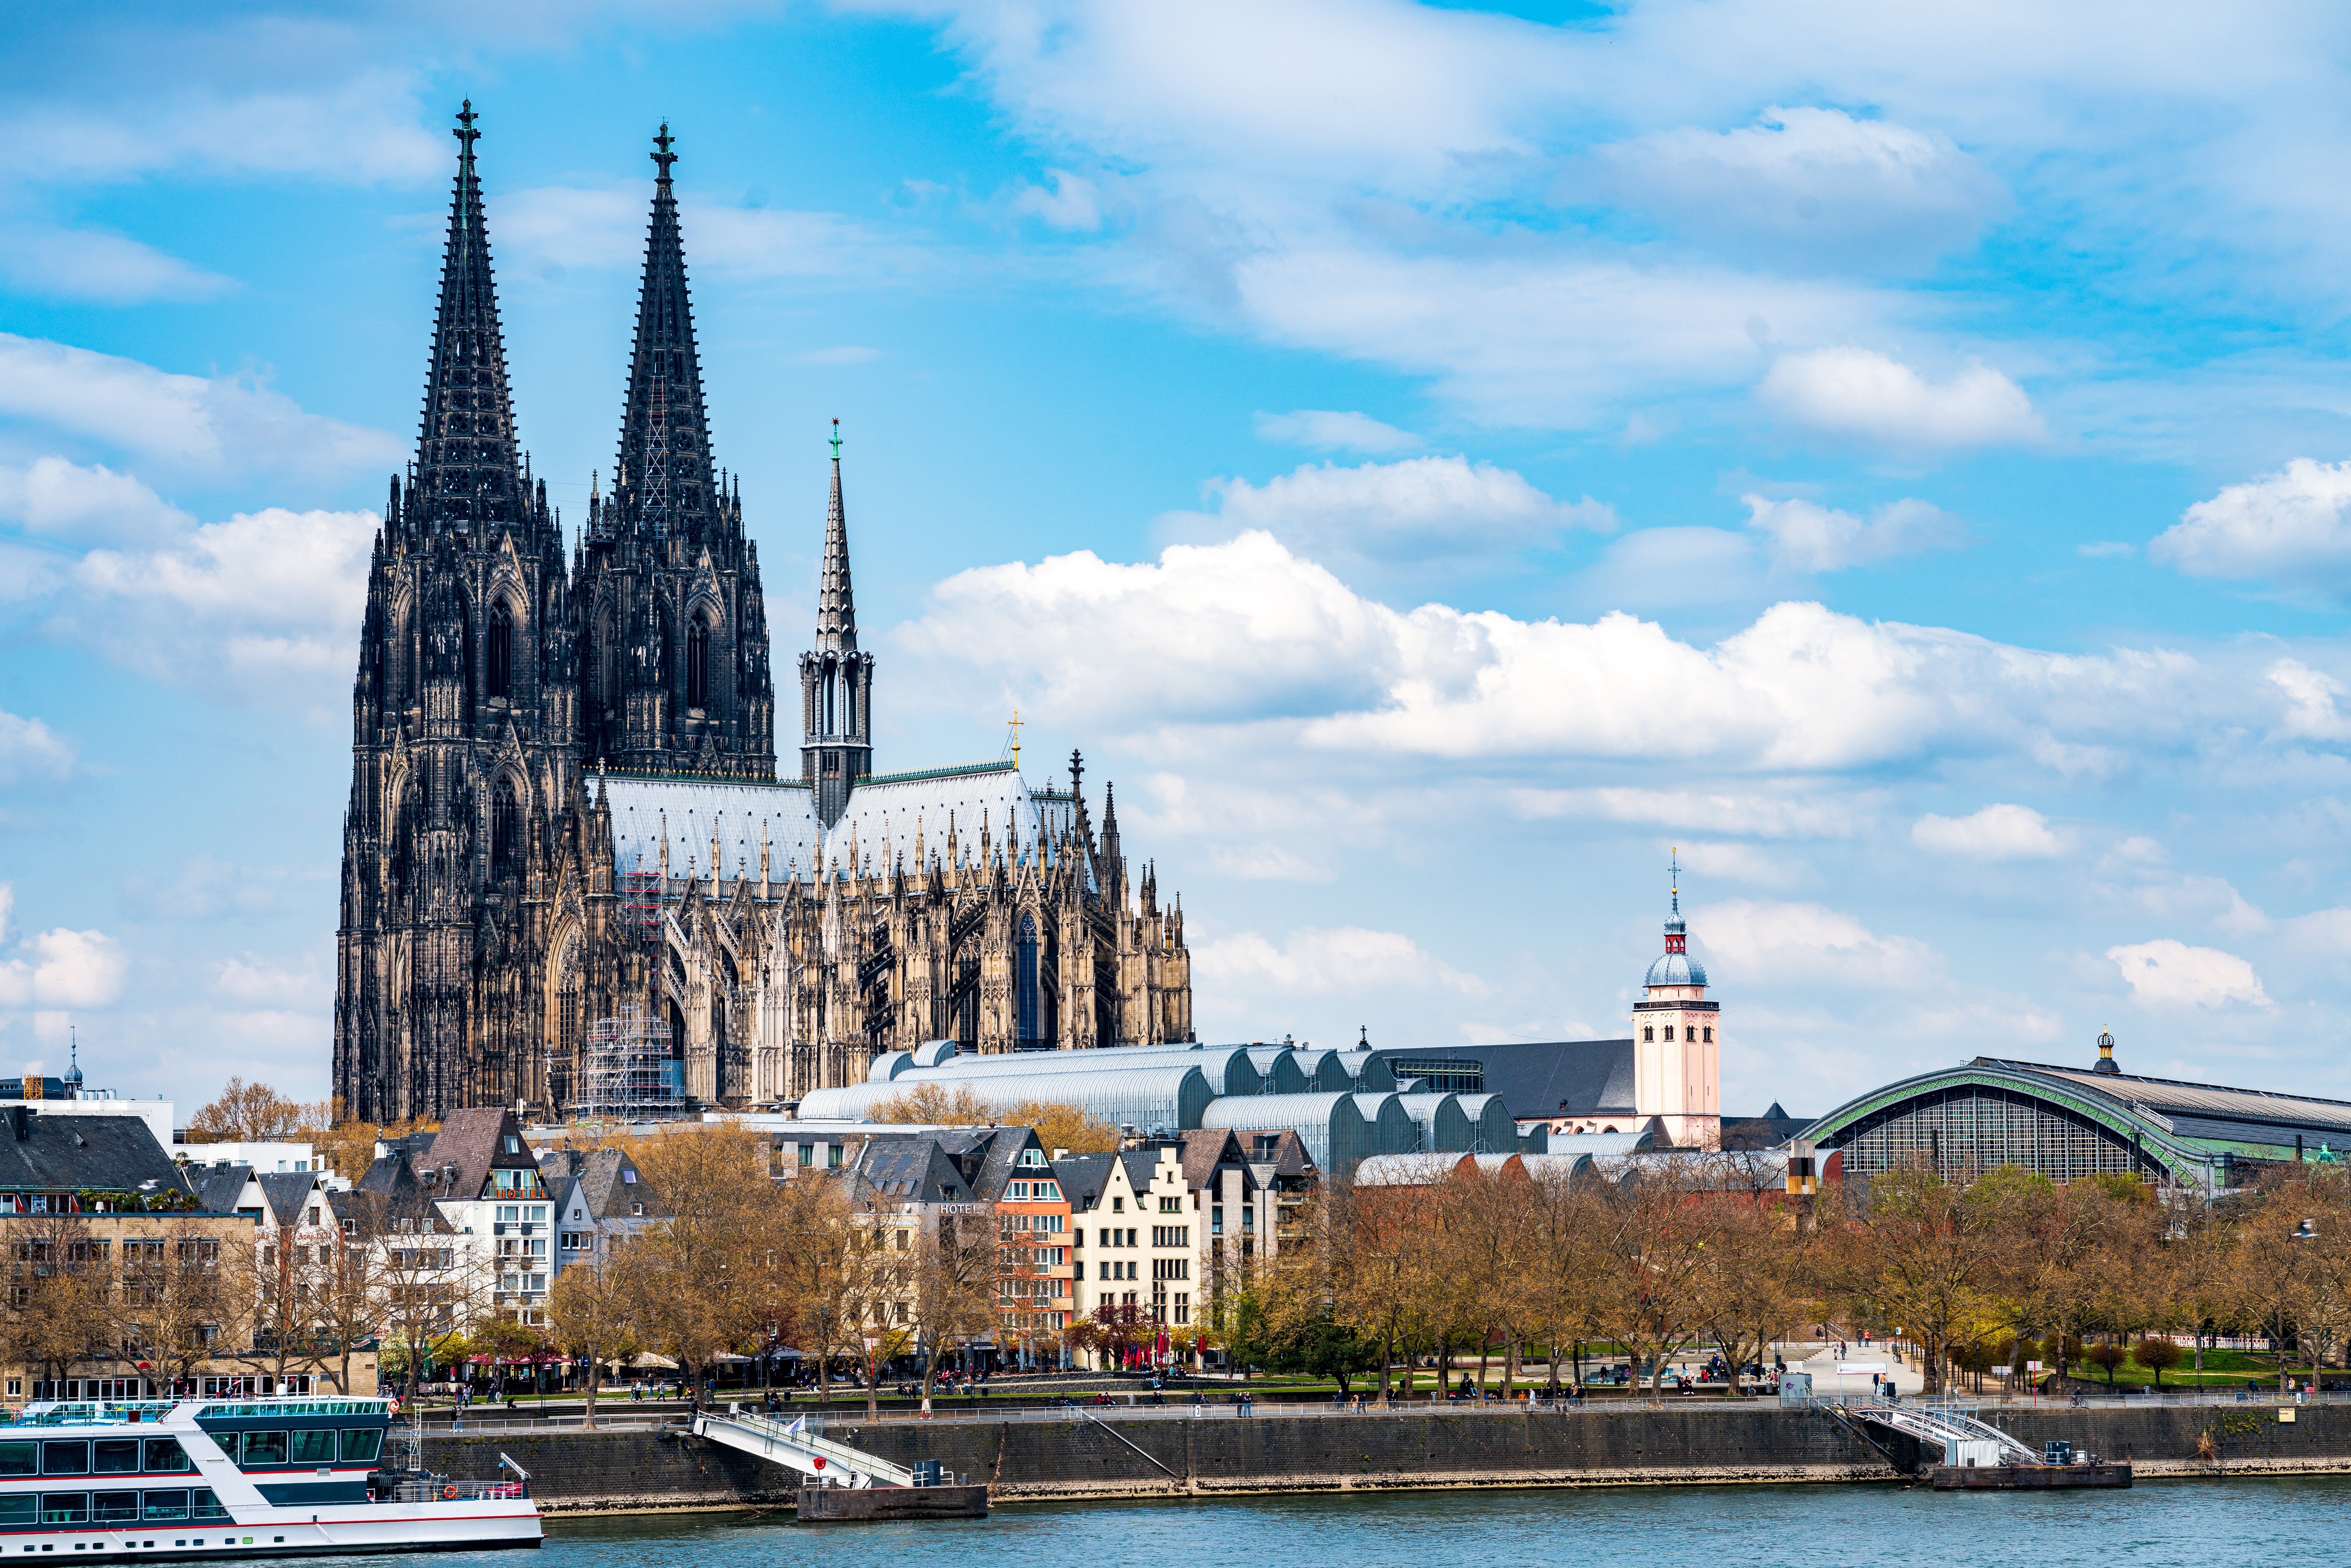 The Cologne Cathedral is truly something to behold - a must-visit while in the city!